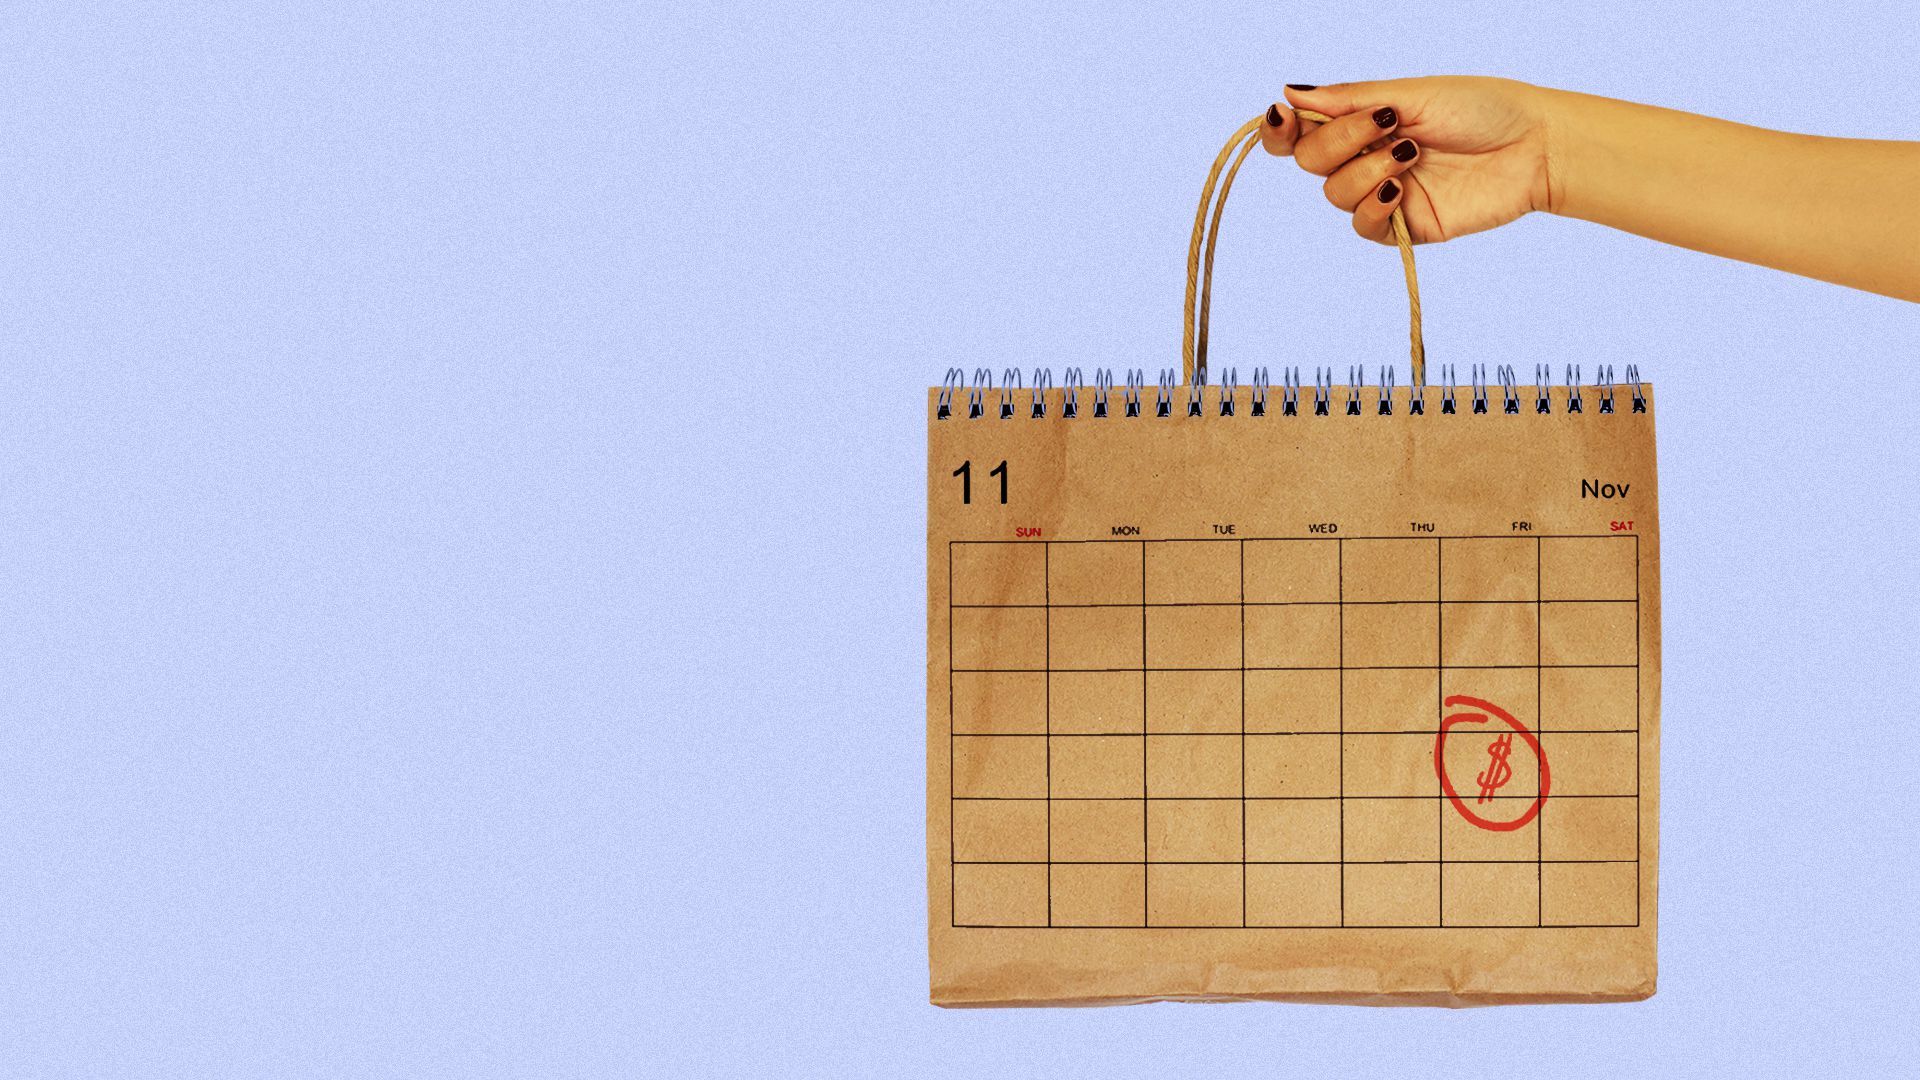 Illustration of a hand holding a bag with a calendar on it